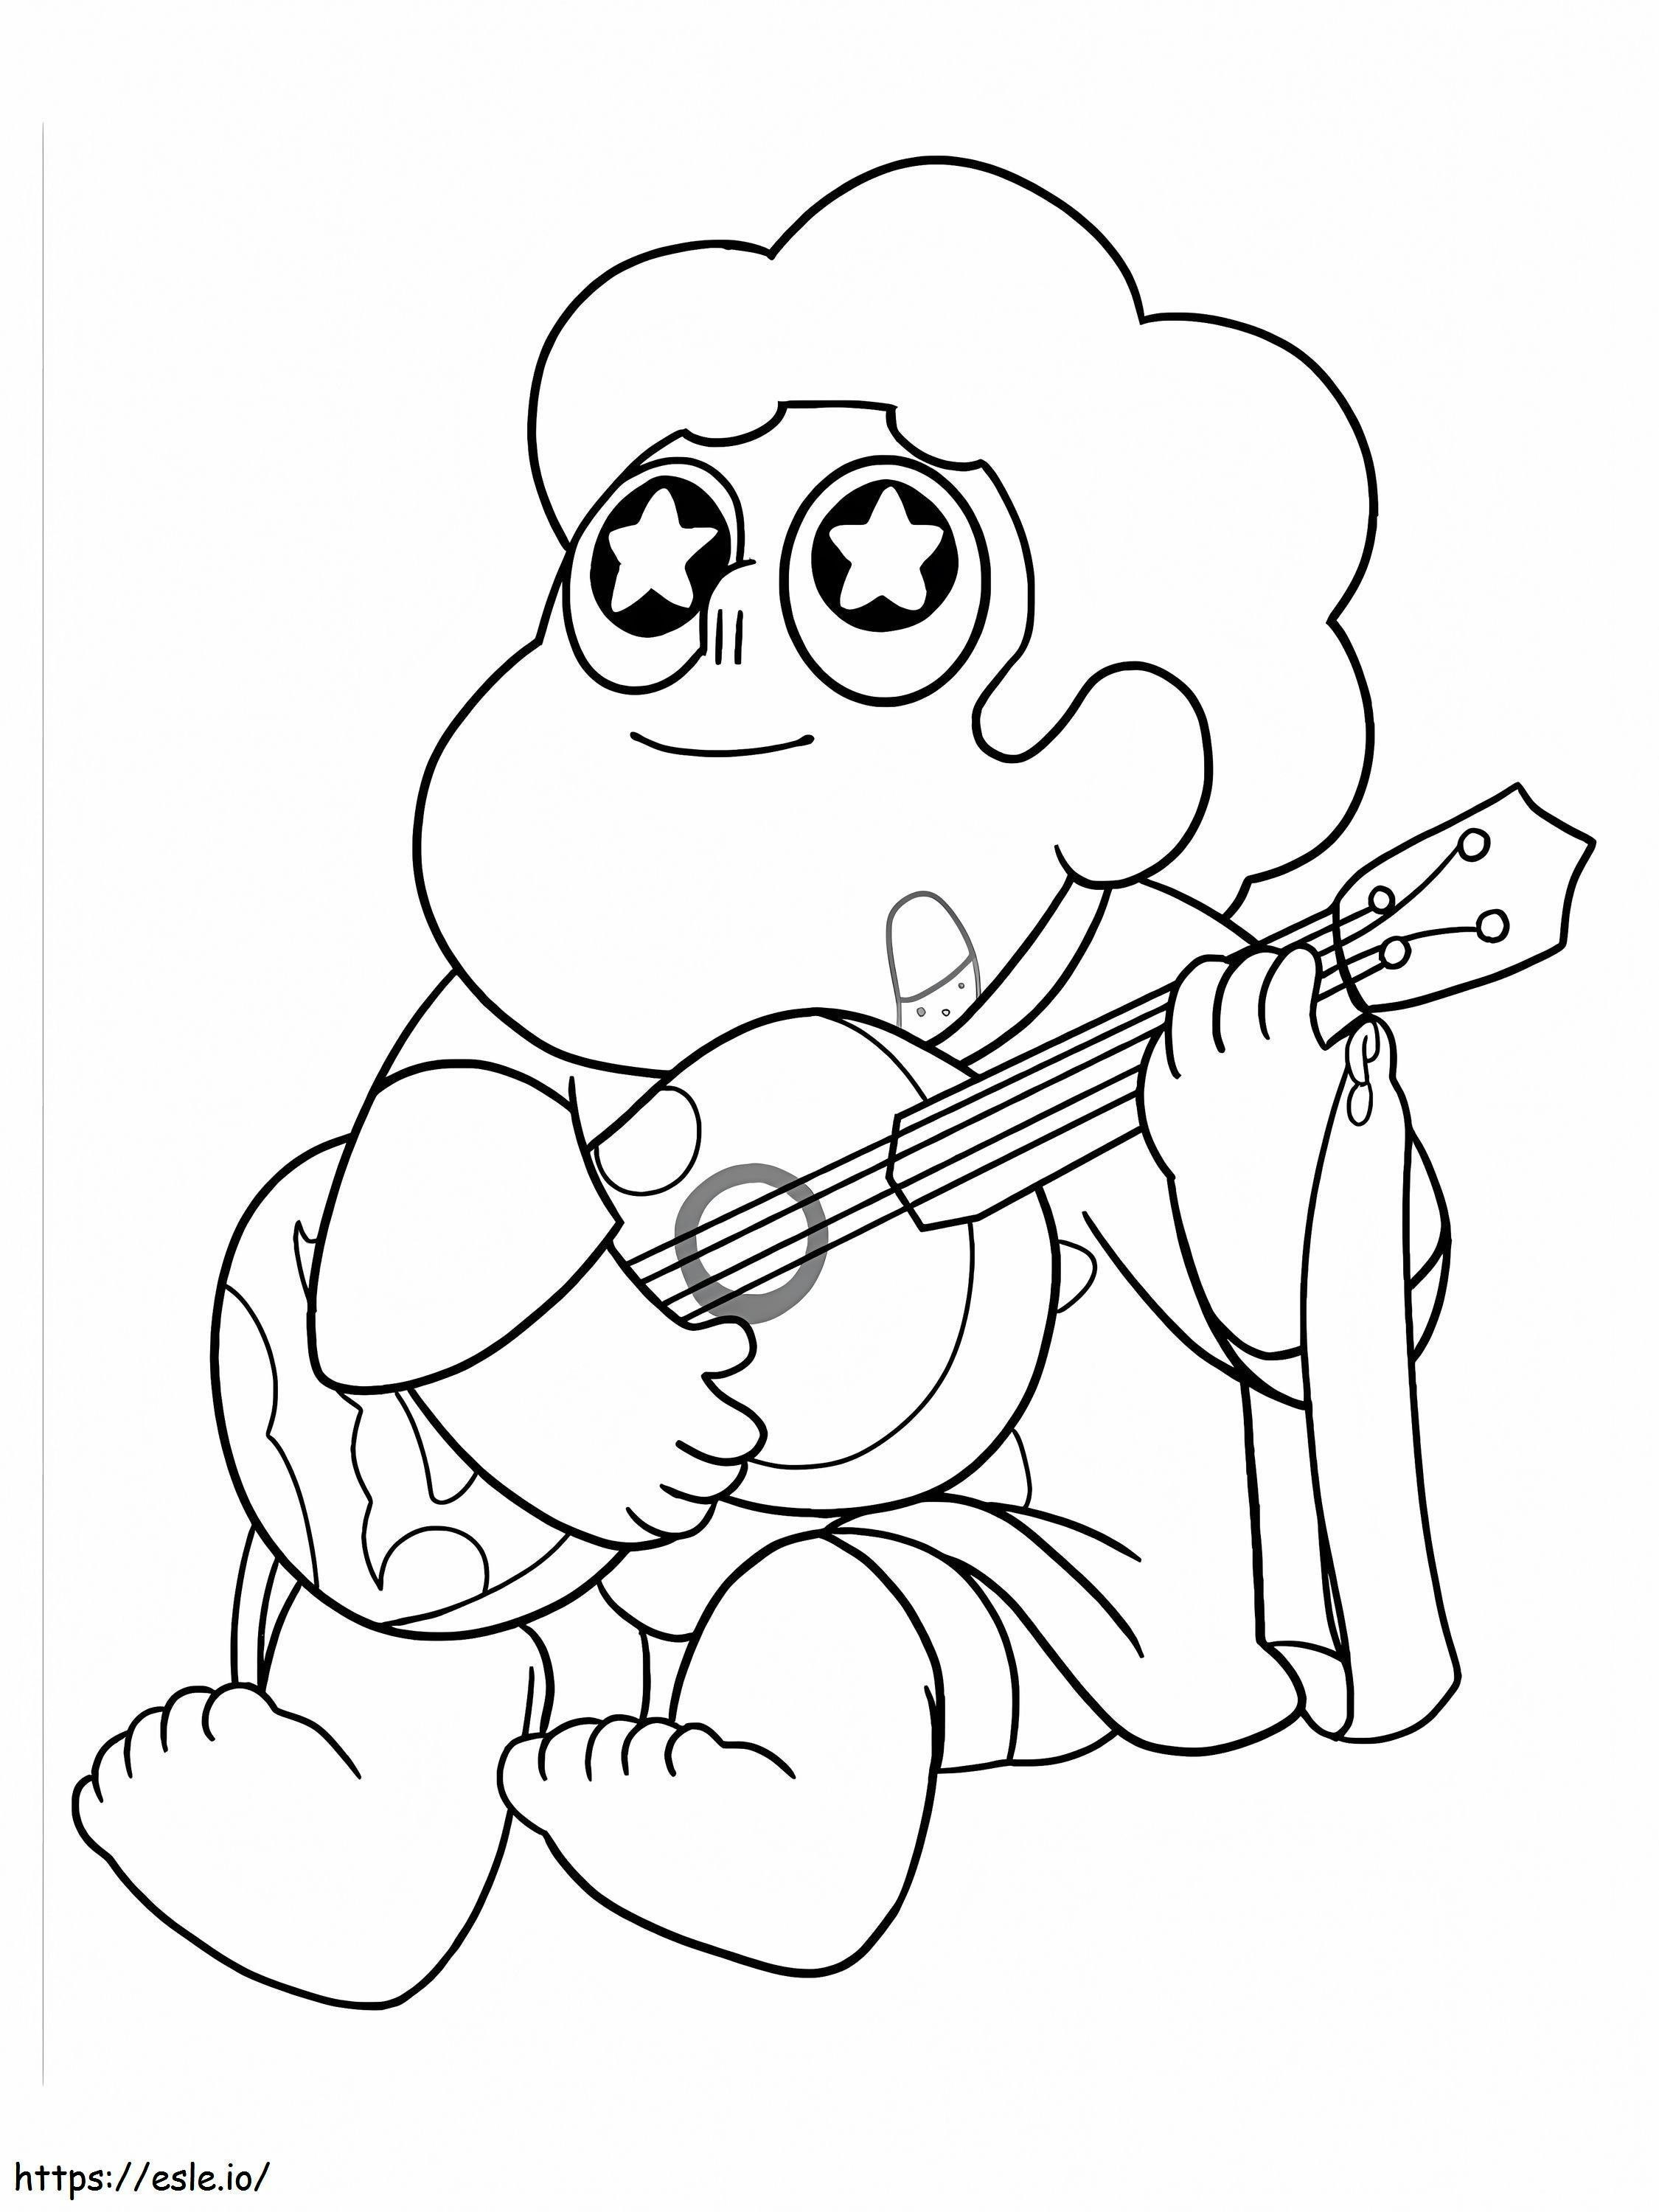 Steven Playing Guitar coloring page